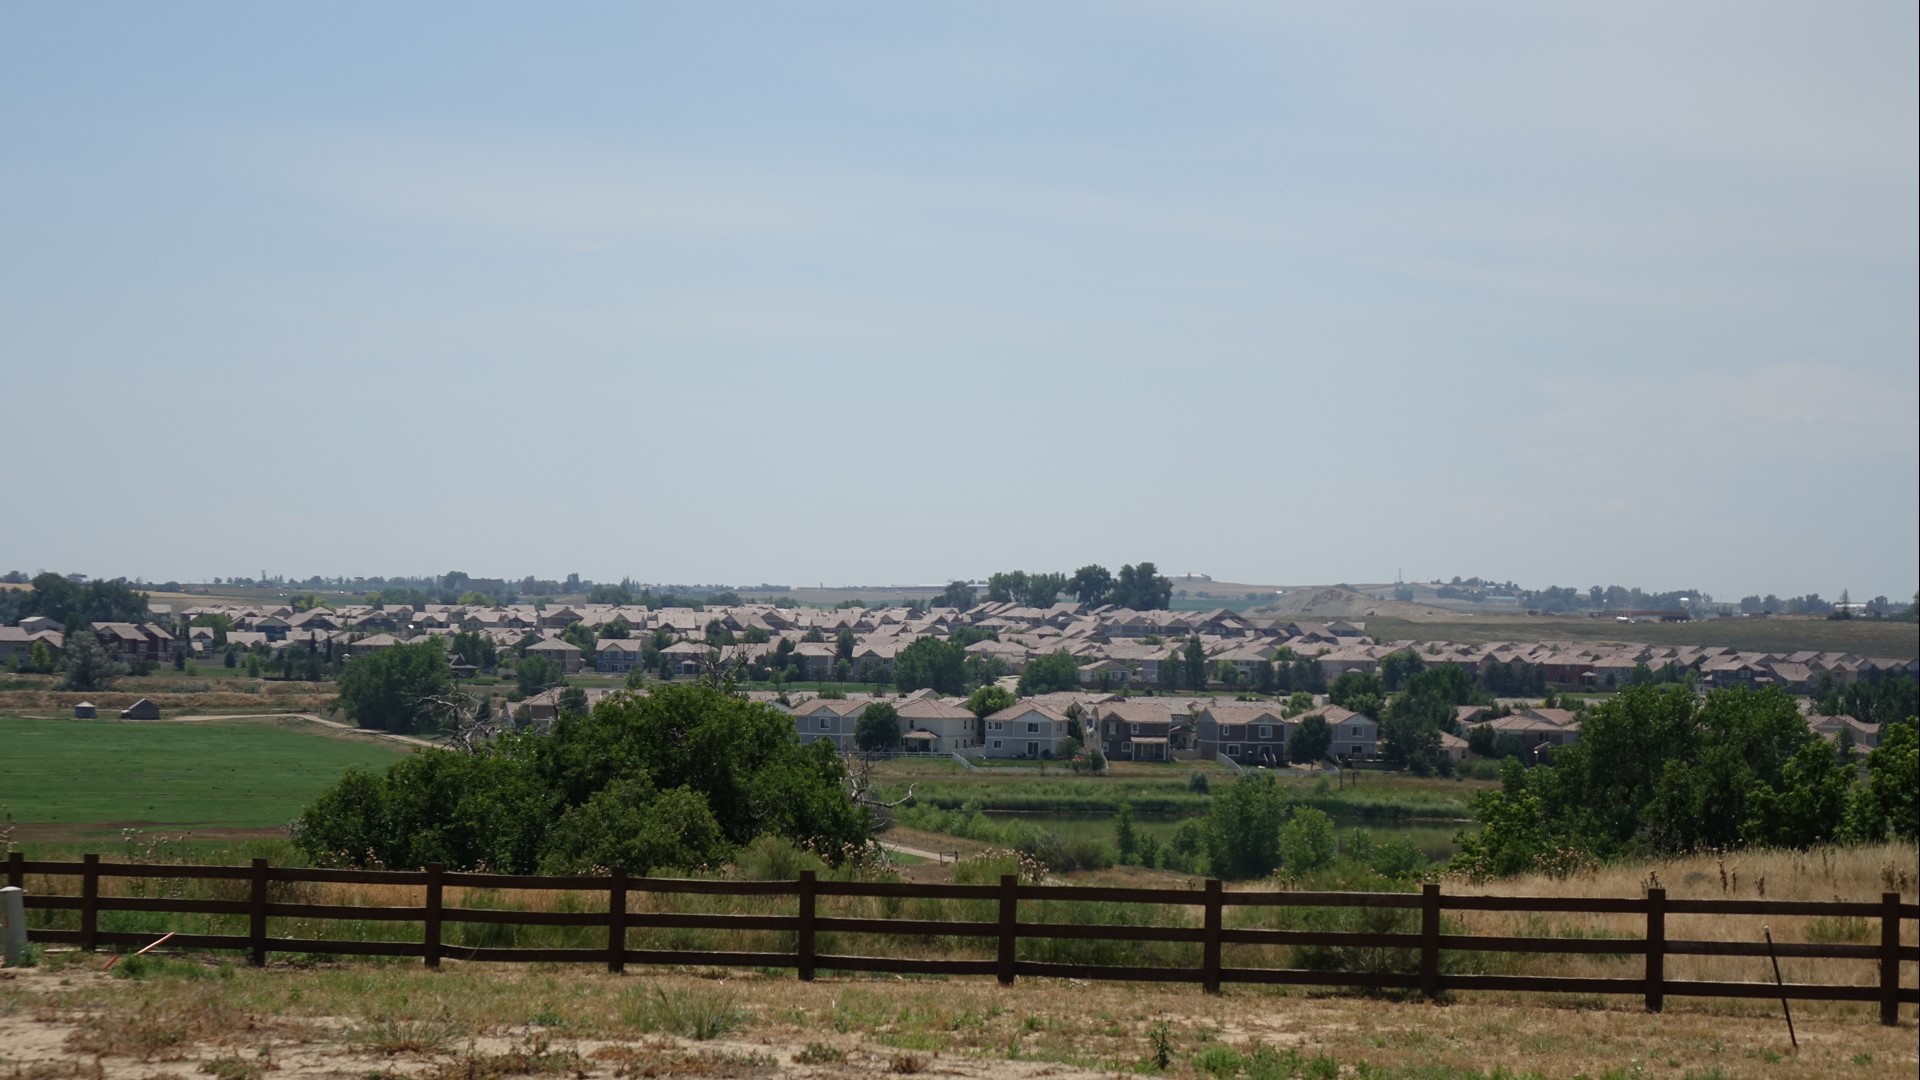 Johnstown, Colorado's population has grown by 10,000 people since the year 2000.